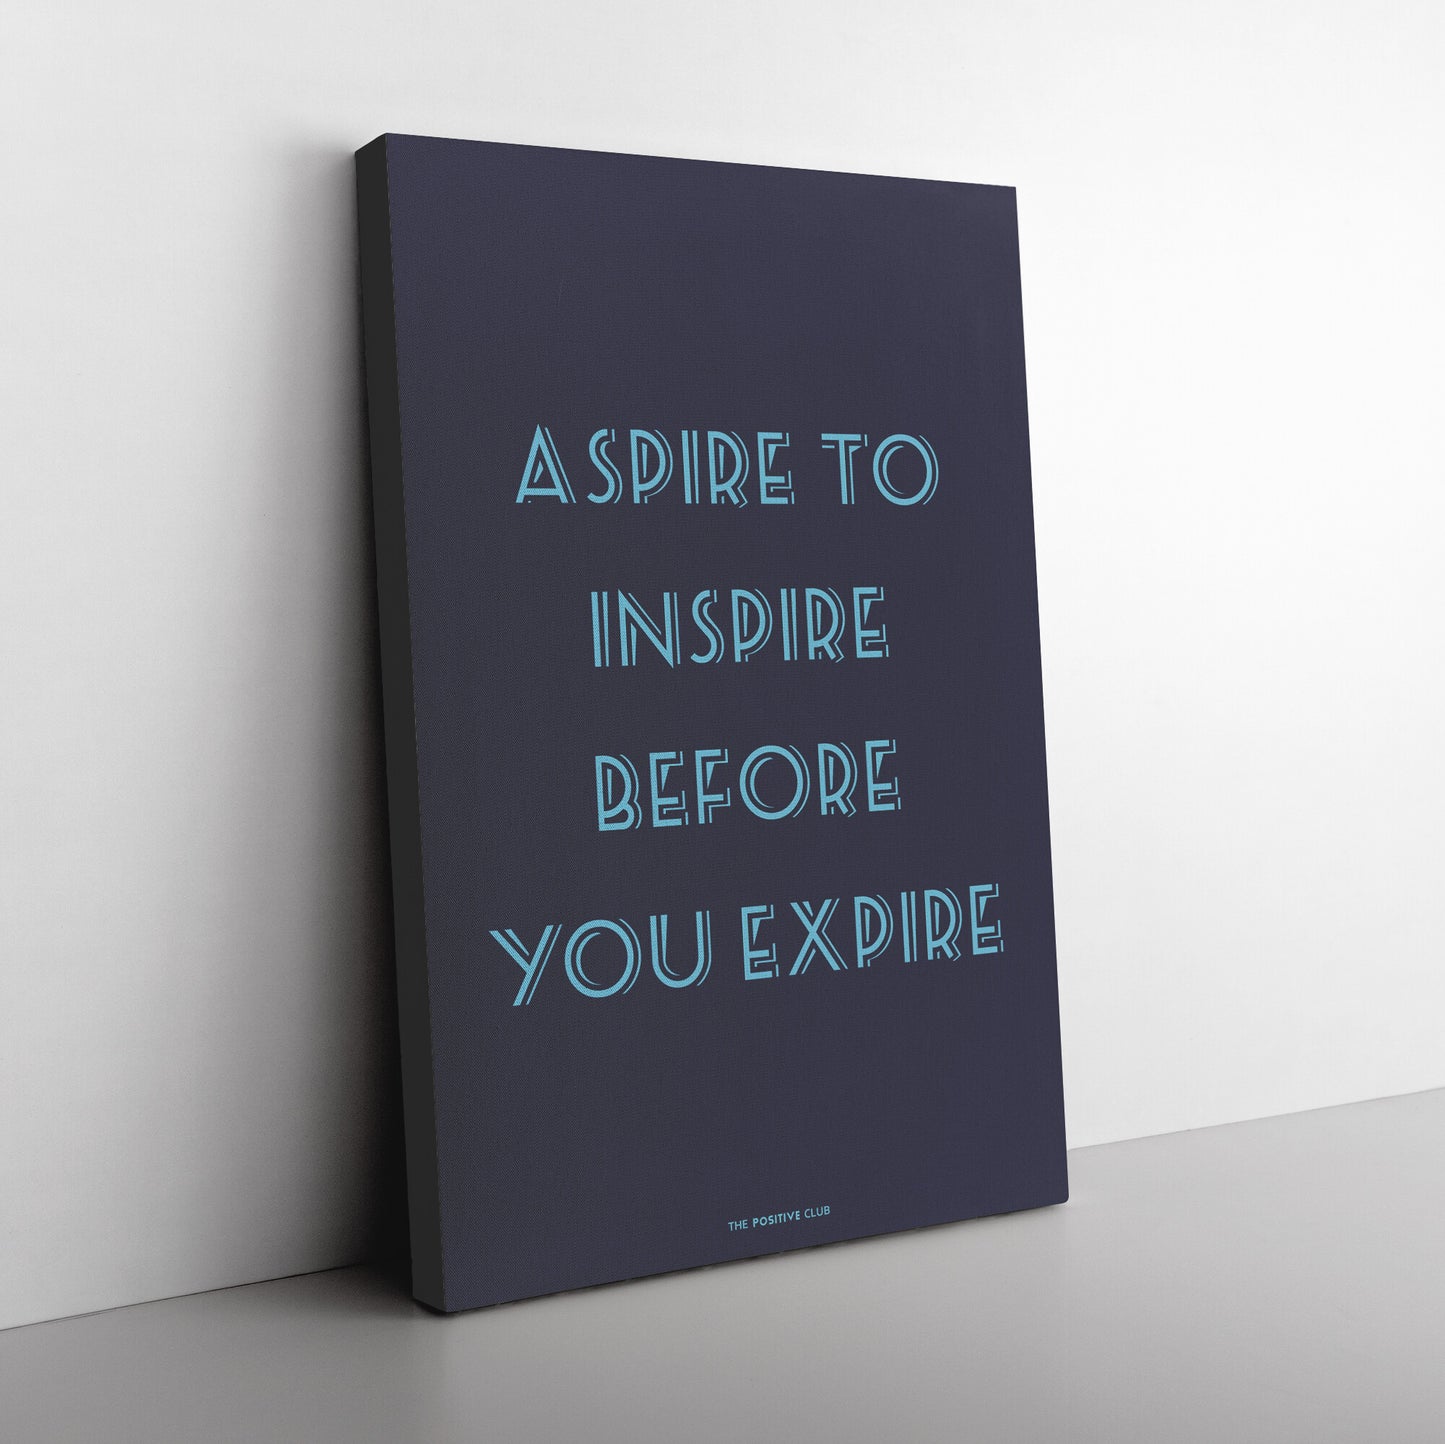 ASPIRE TO INSPIRE BEFORE YOU EXPIRE